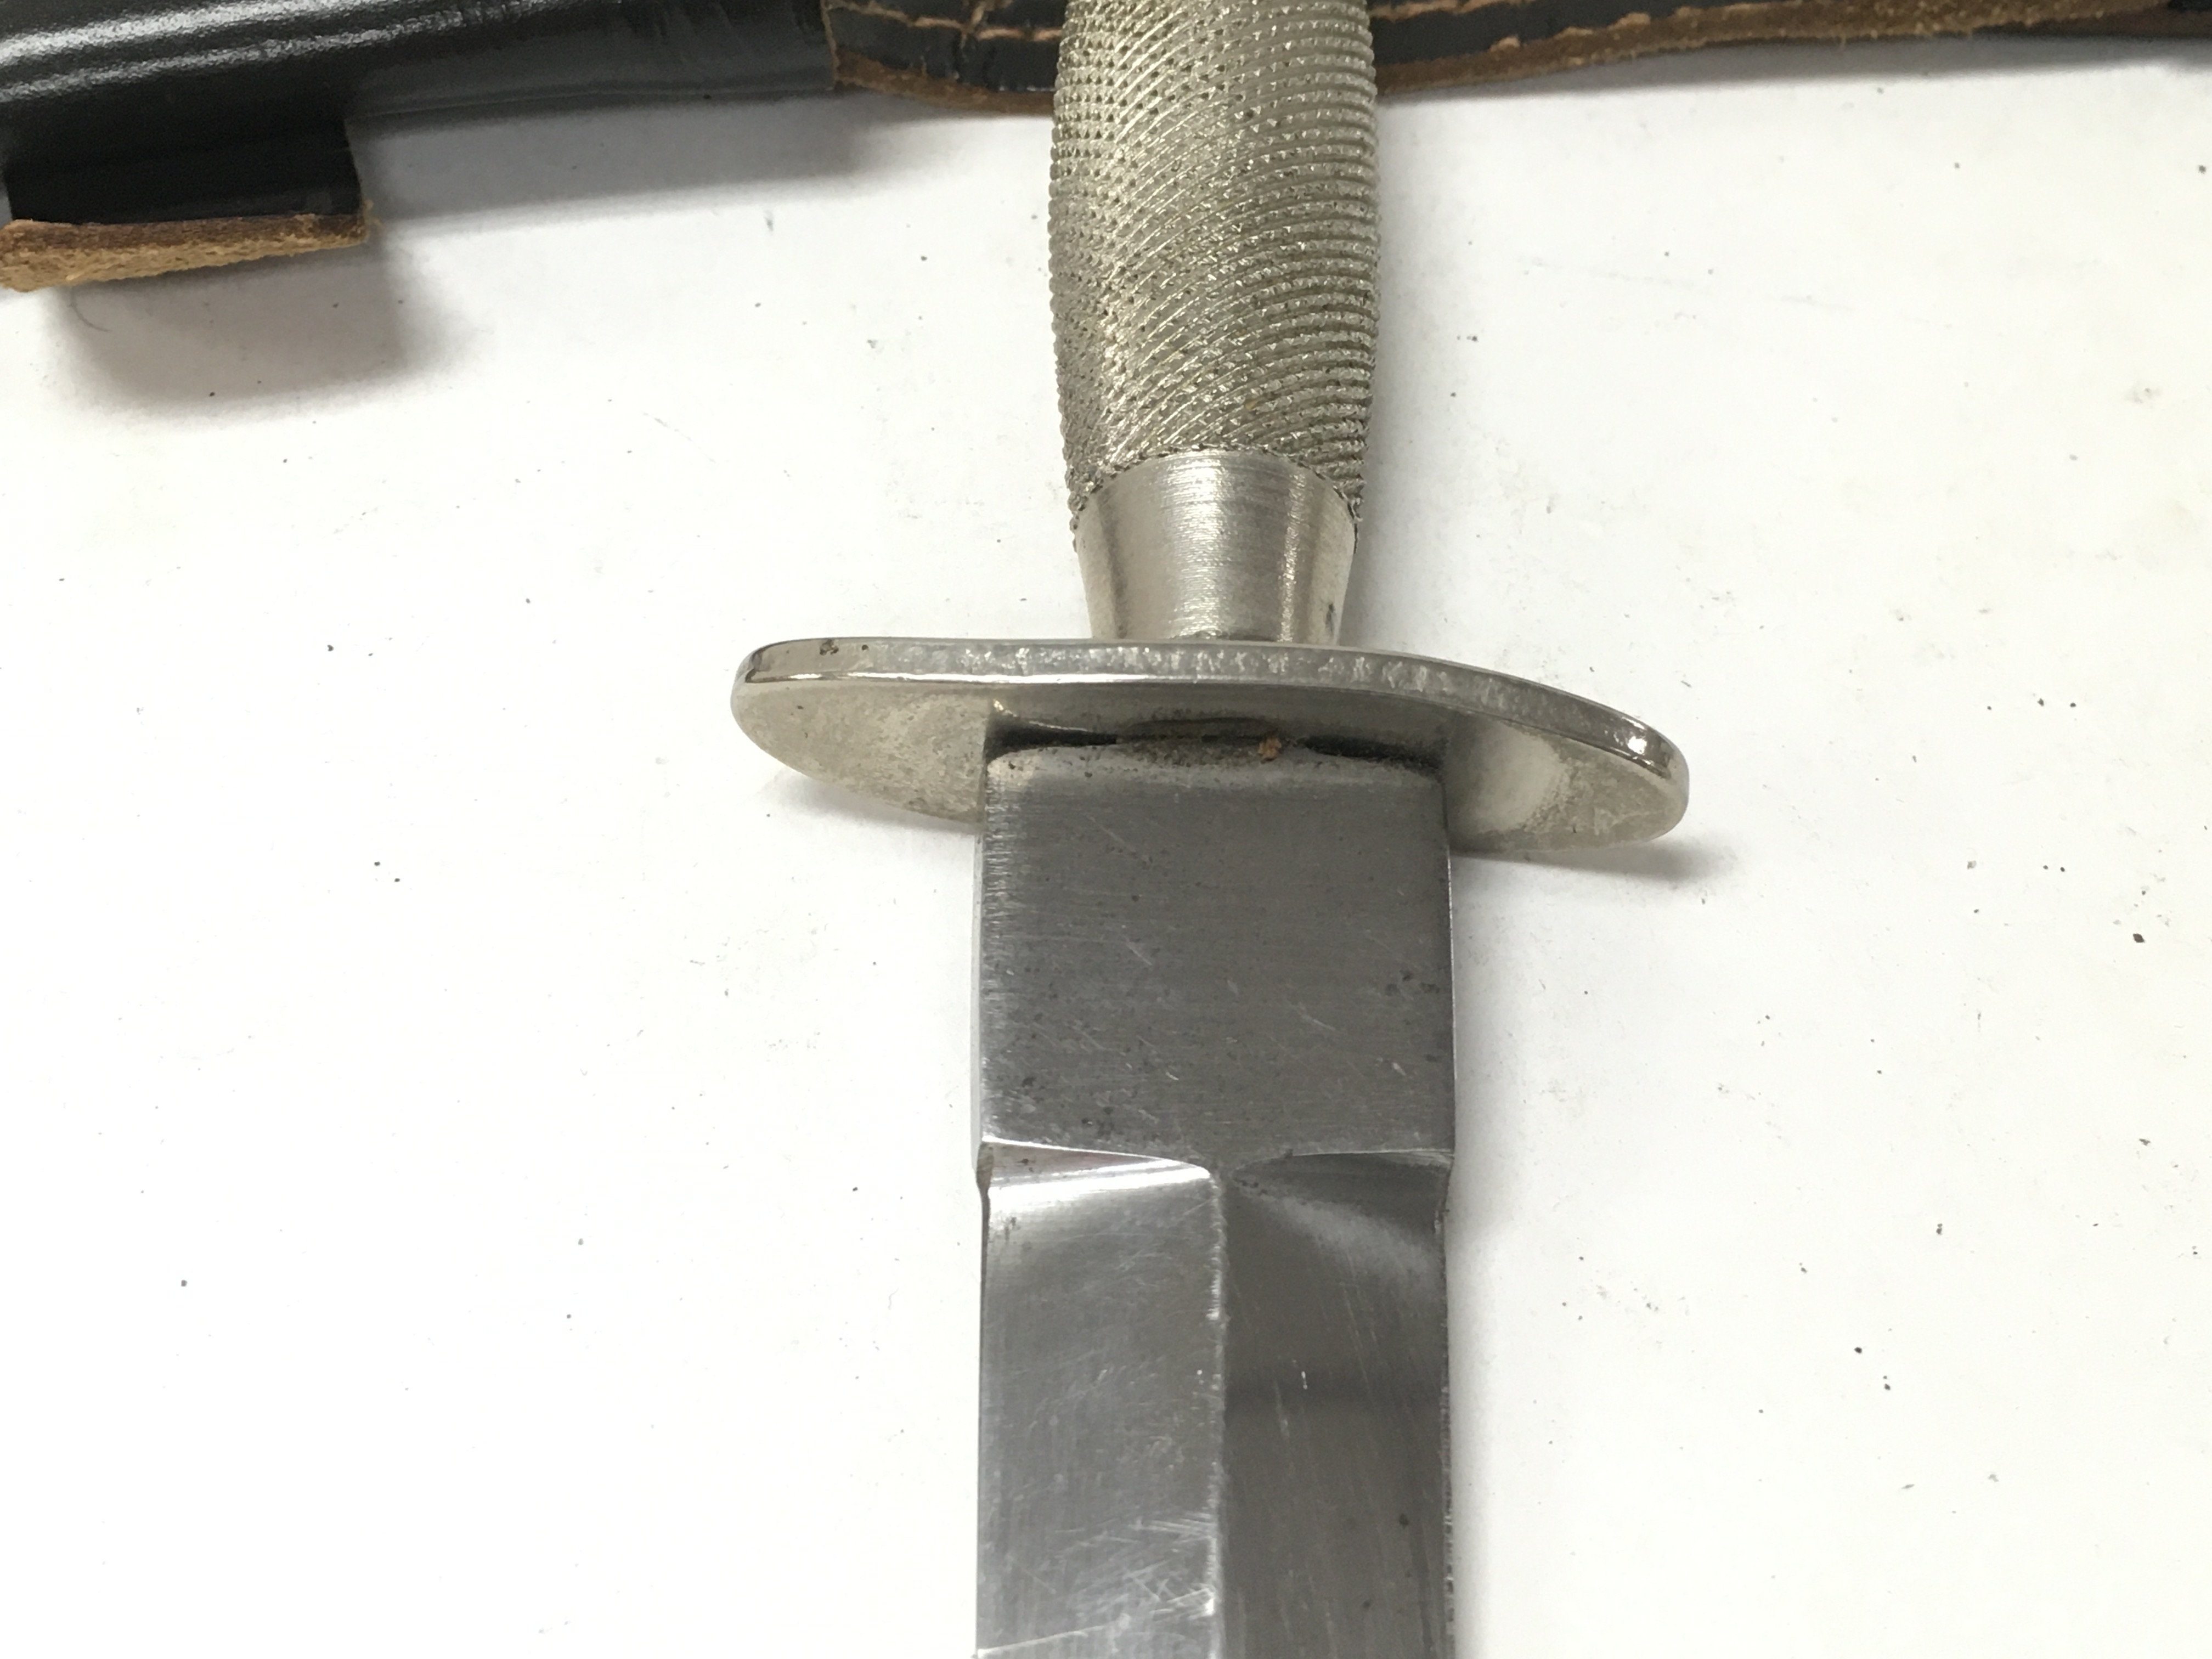 A Fairbairn Sykes fighting knife with leather scab - Image 3 of 4